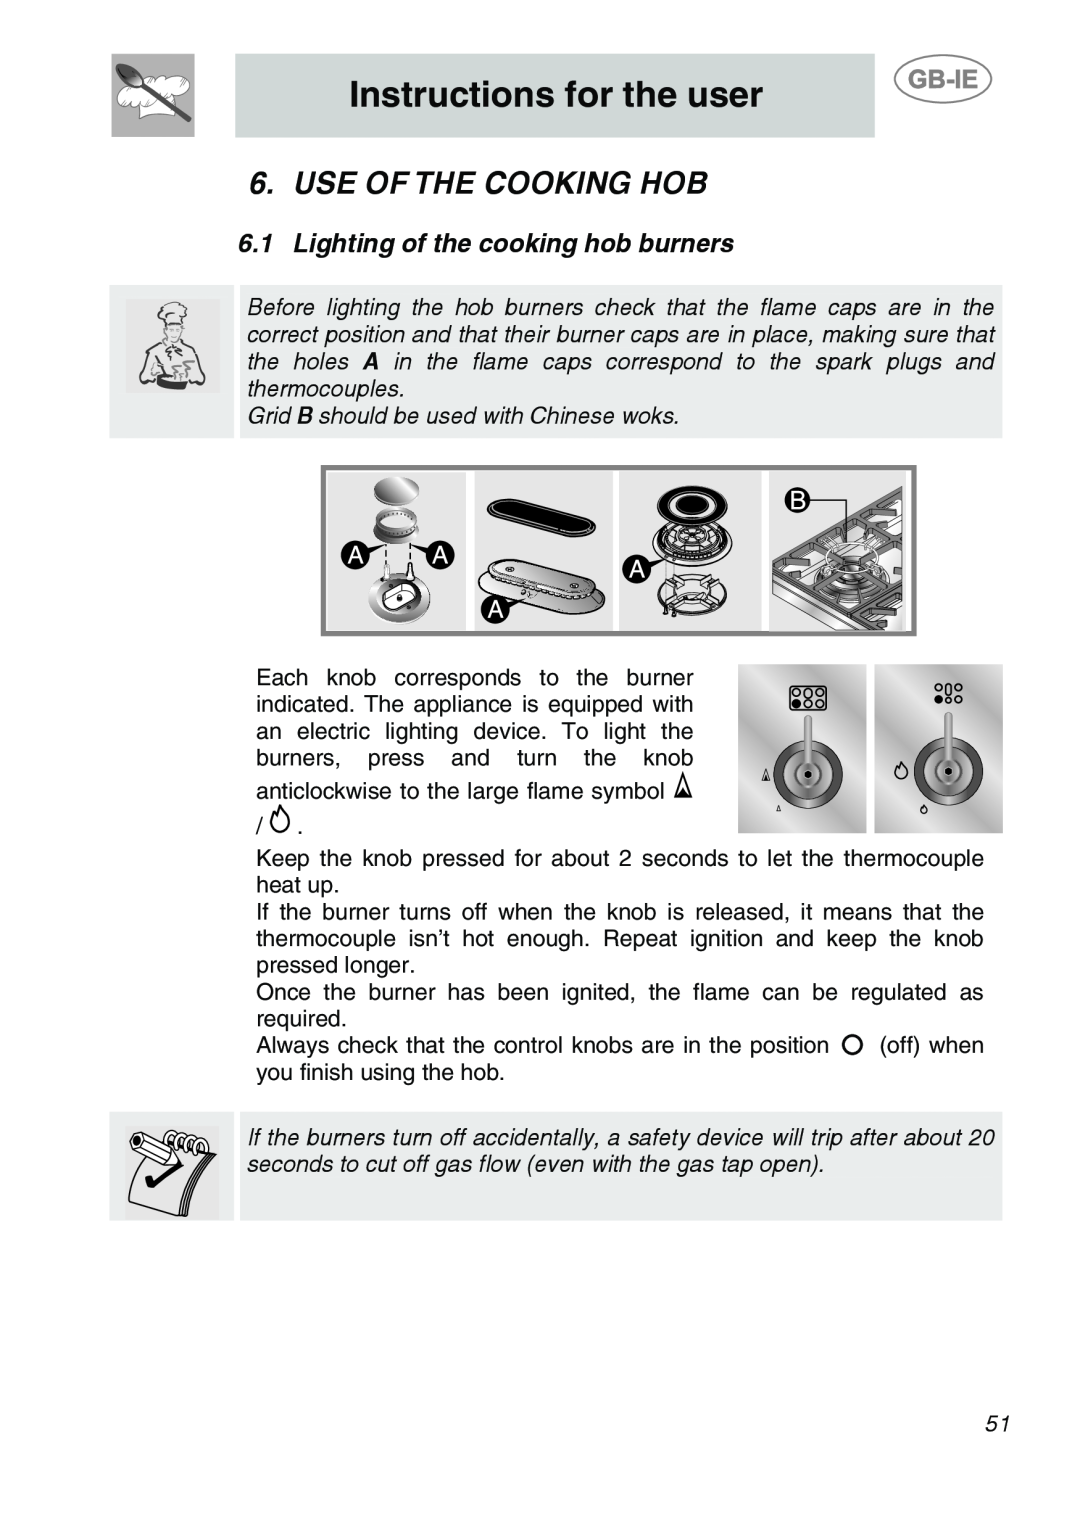 Smeg A1-6 manual Use Of The Cooking Hob, Lighting of the cooking hob burners, Instructions for the user 